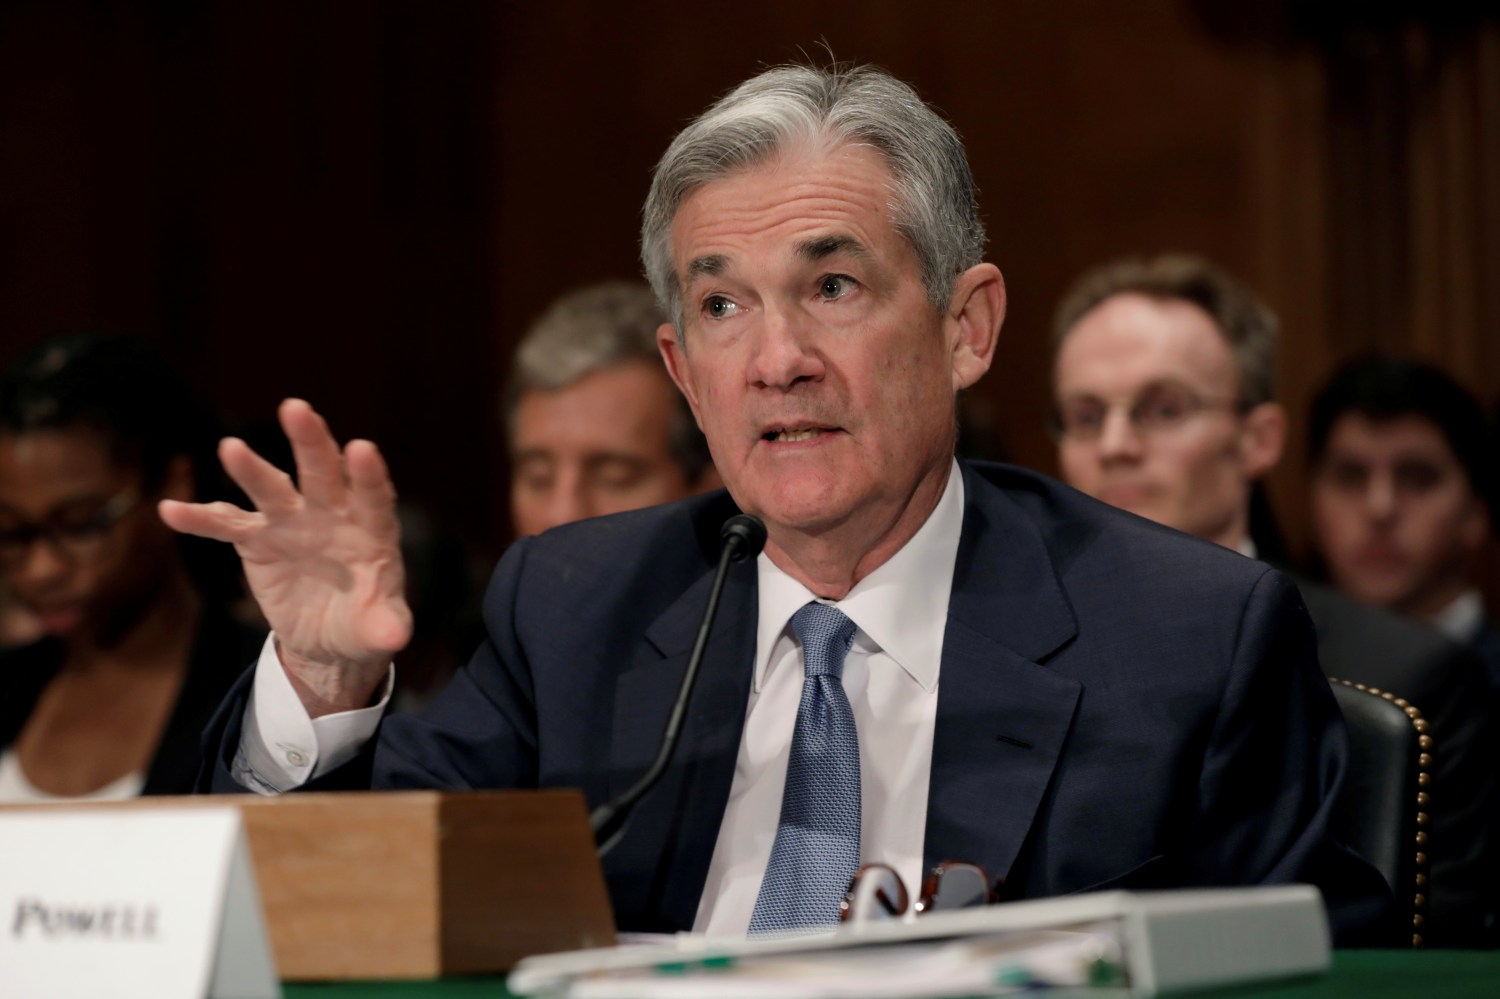 FILE PHOTO: Federal Reserve Board Chairman Jerome Powell testifies before a Senate Banking Housing and Urban Affairs Committee hearing on the The Semiannual Monetary Policy Report to the Congress, on Capitol Hill in Washington, DC, U.S., March 1, 2018. REUTERS/Yuri Gripas/File Photo - RC1CC0204A00